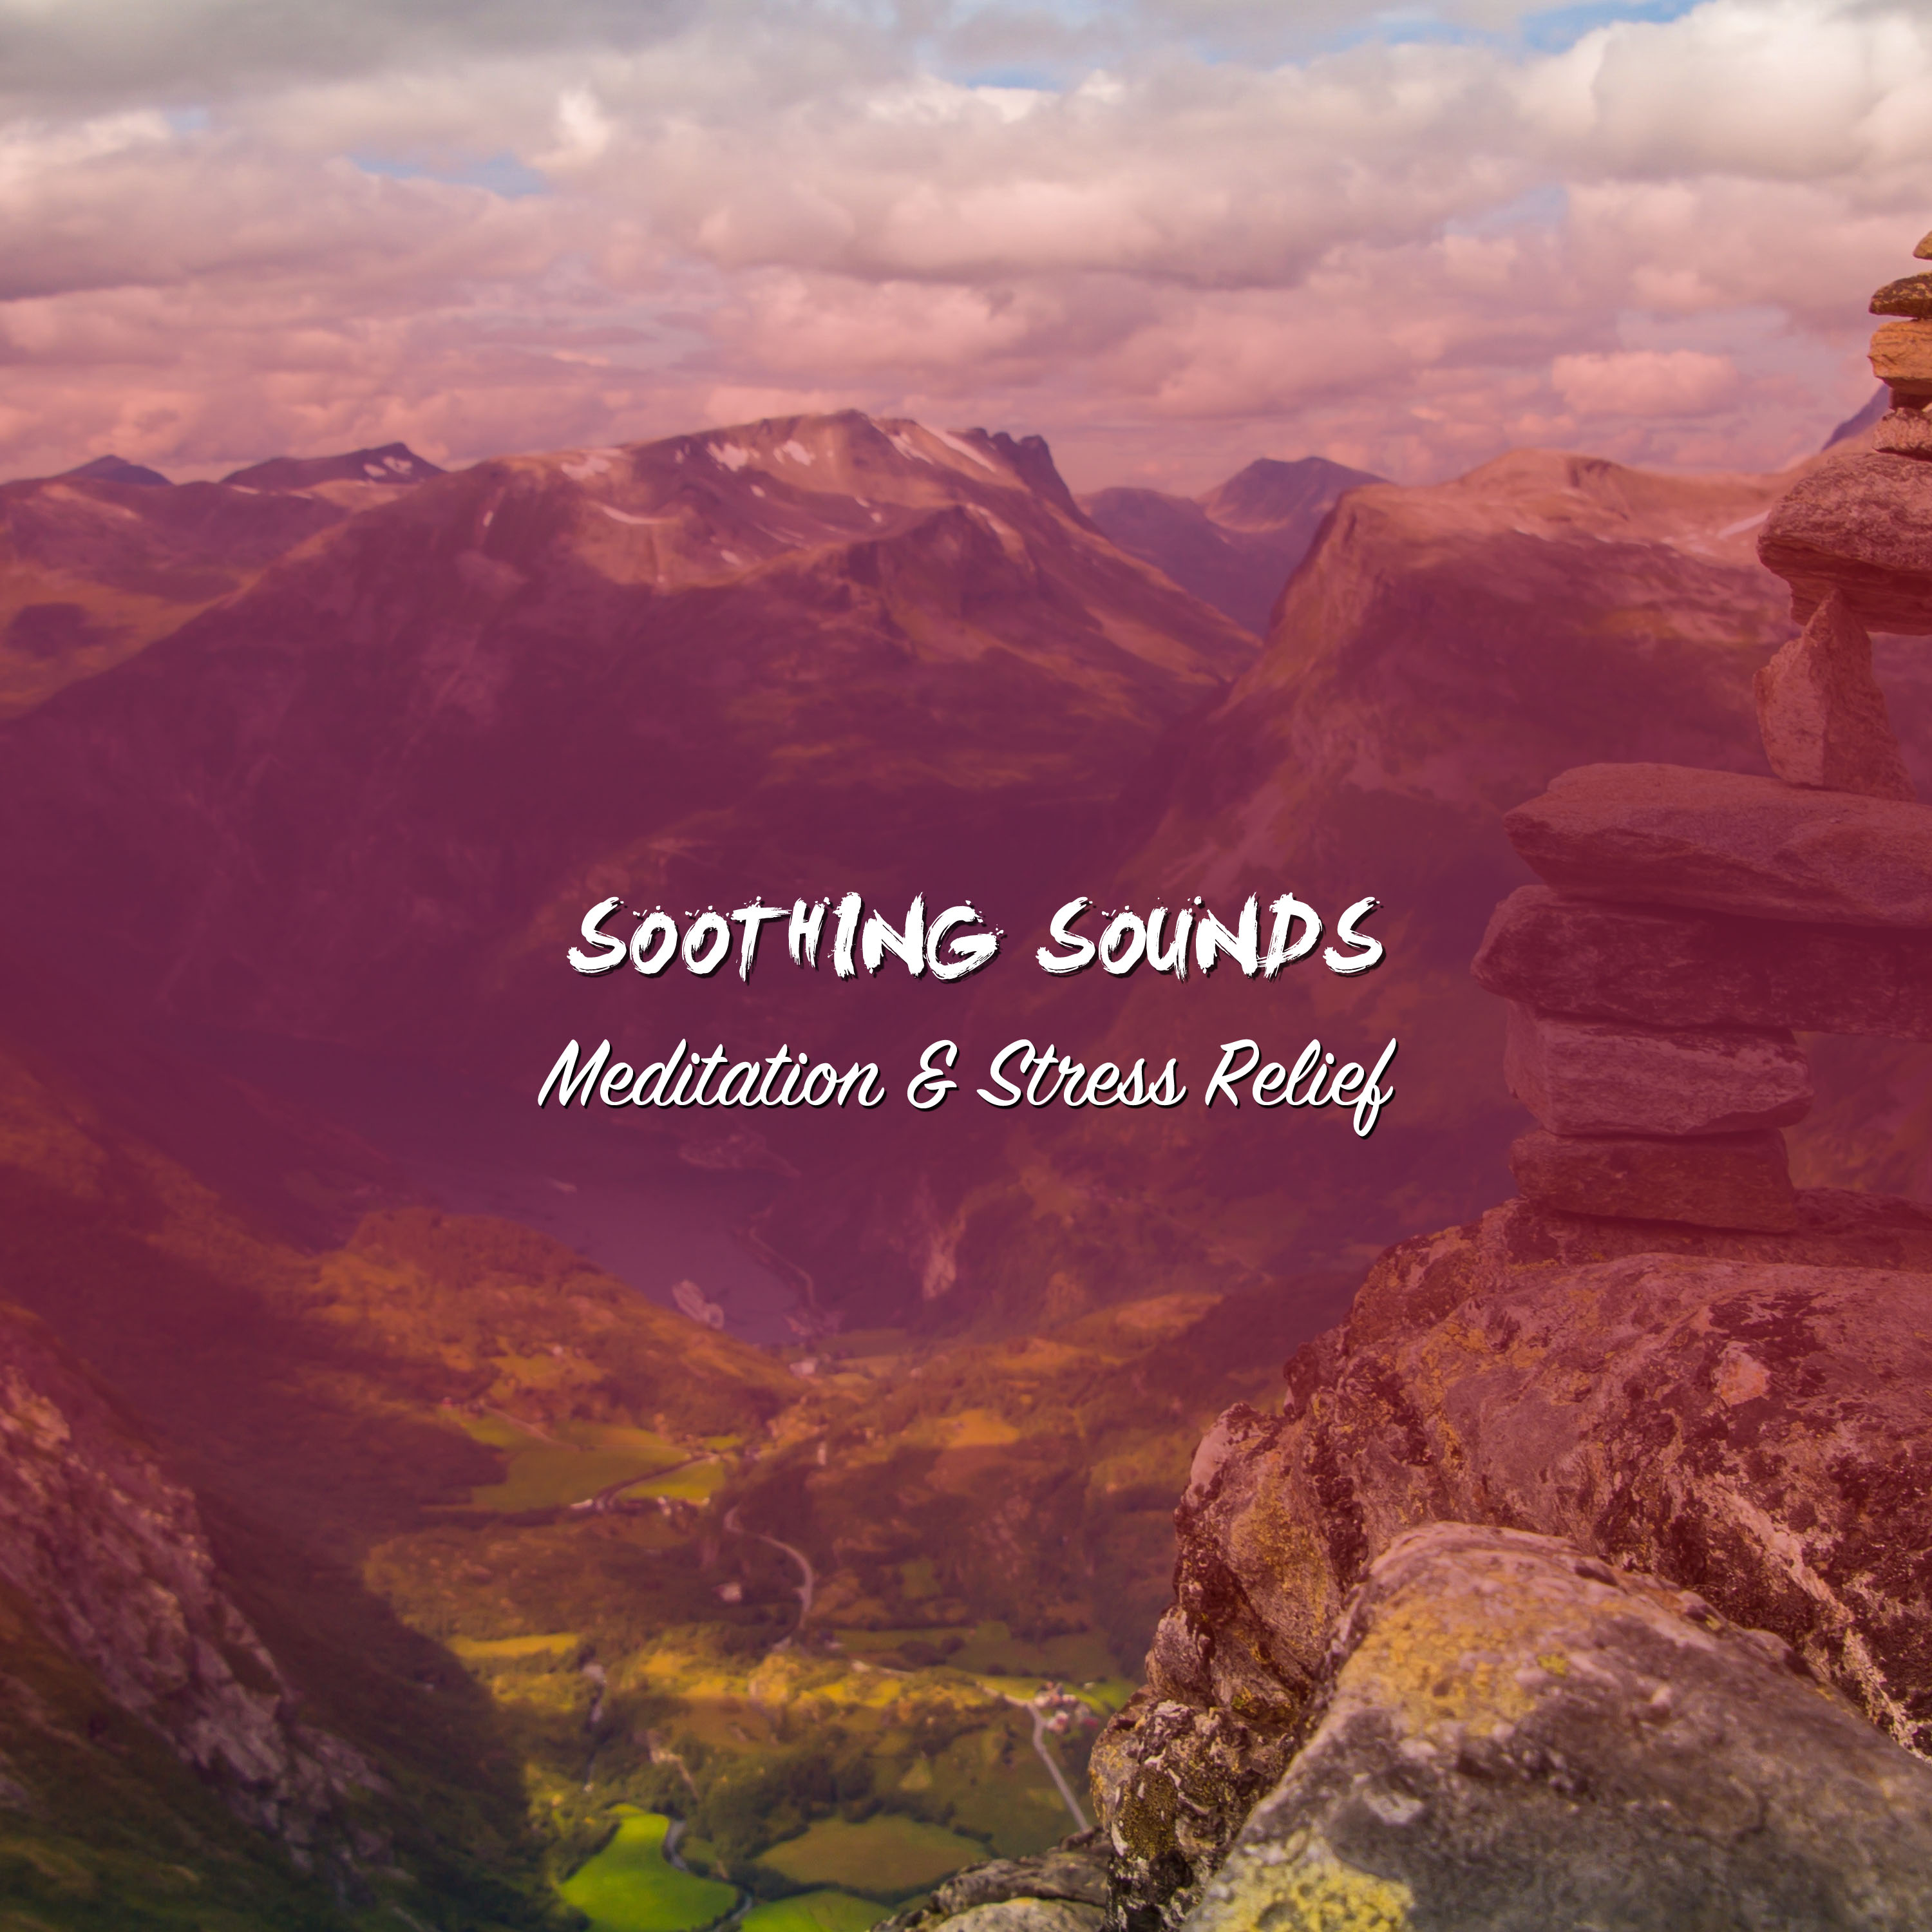 13 Soothing Sounds for Meditation & Stress Relief